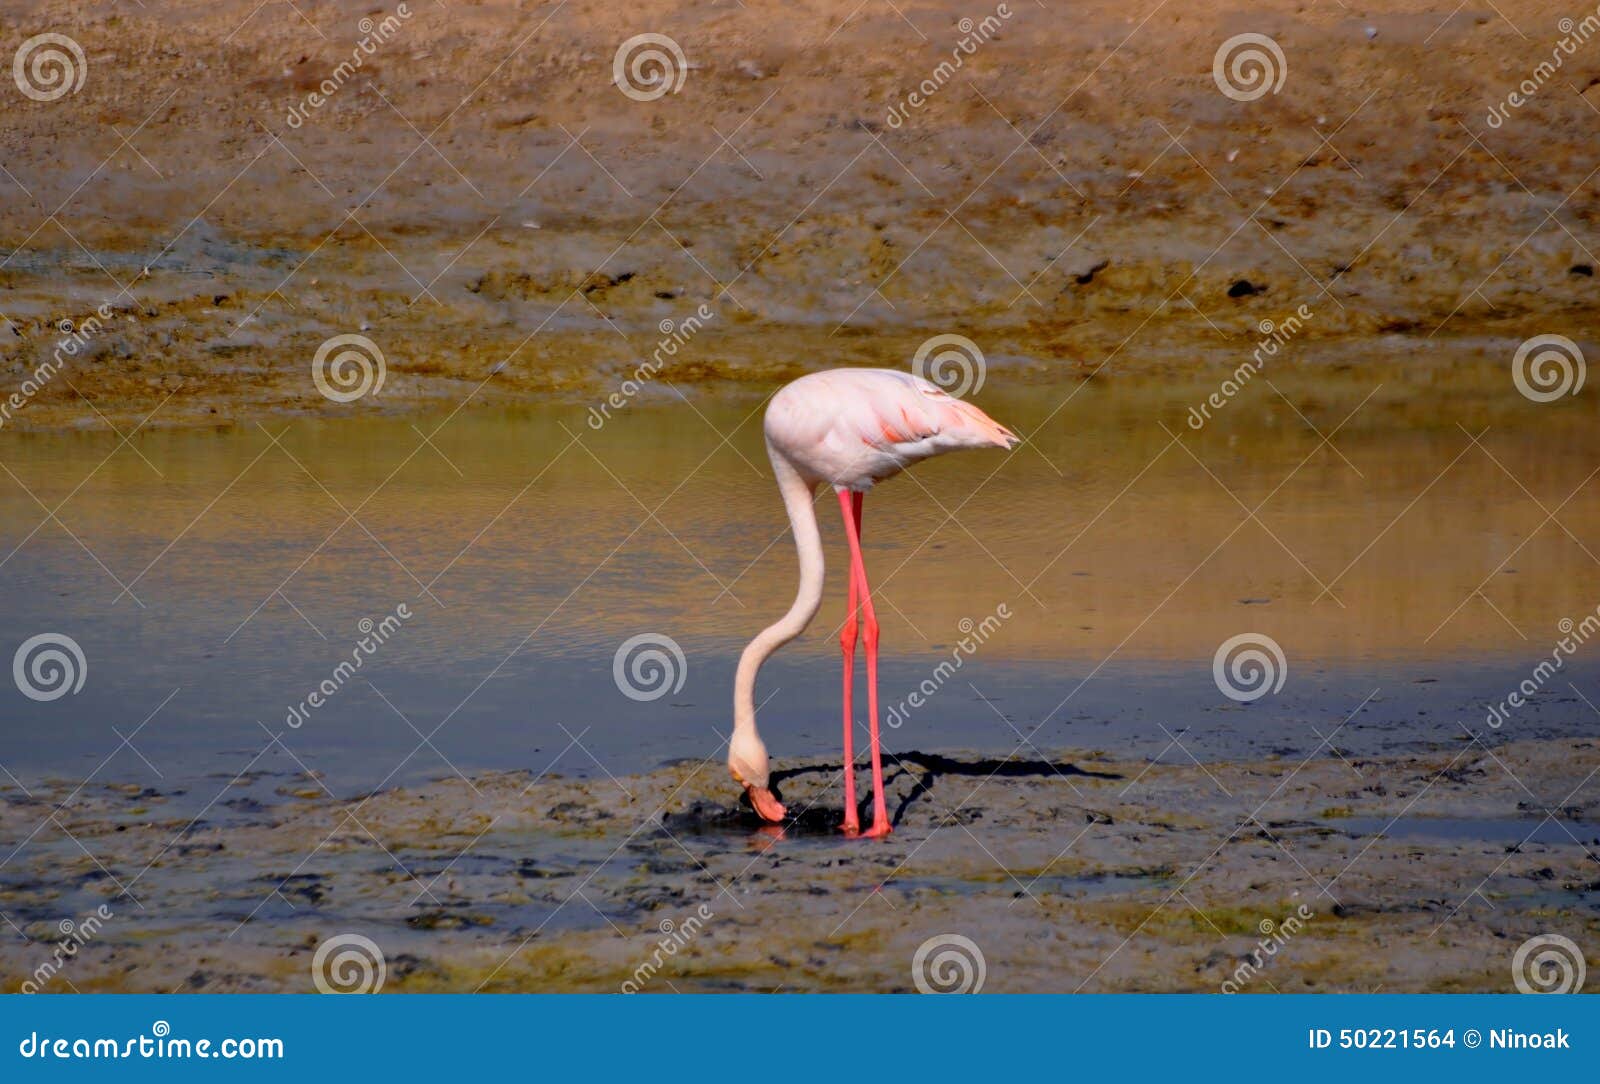 Prevalently Pink Plumage Flamingo Searching Food in the Mud of Ras Al ...